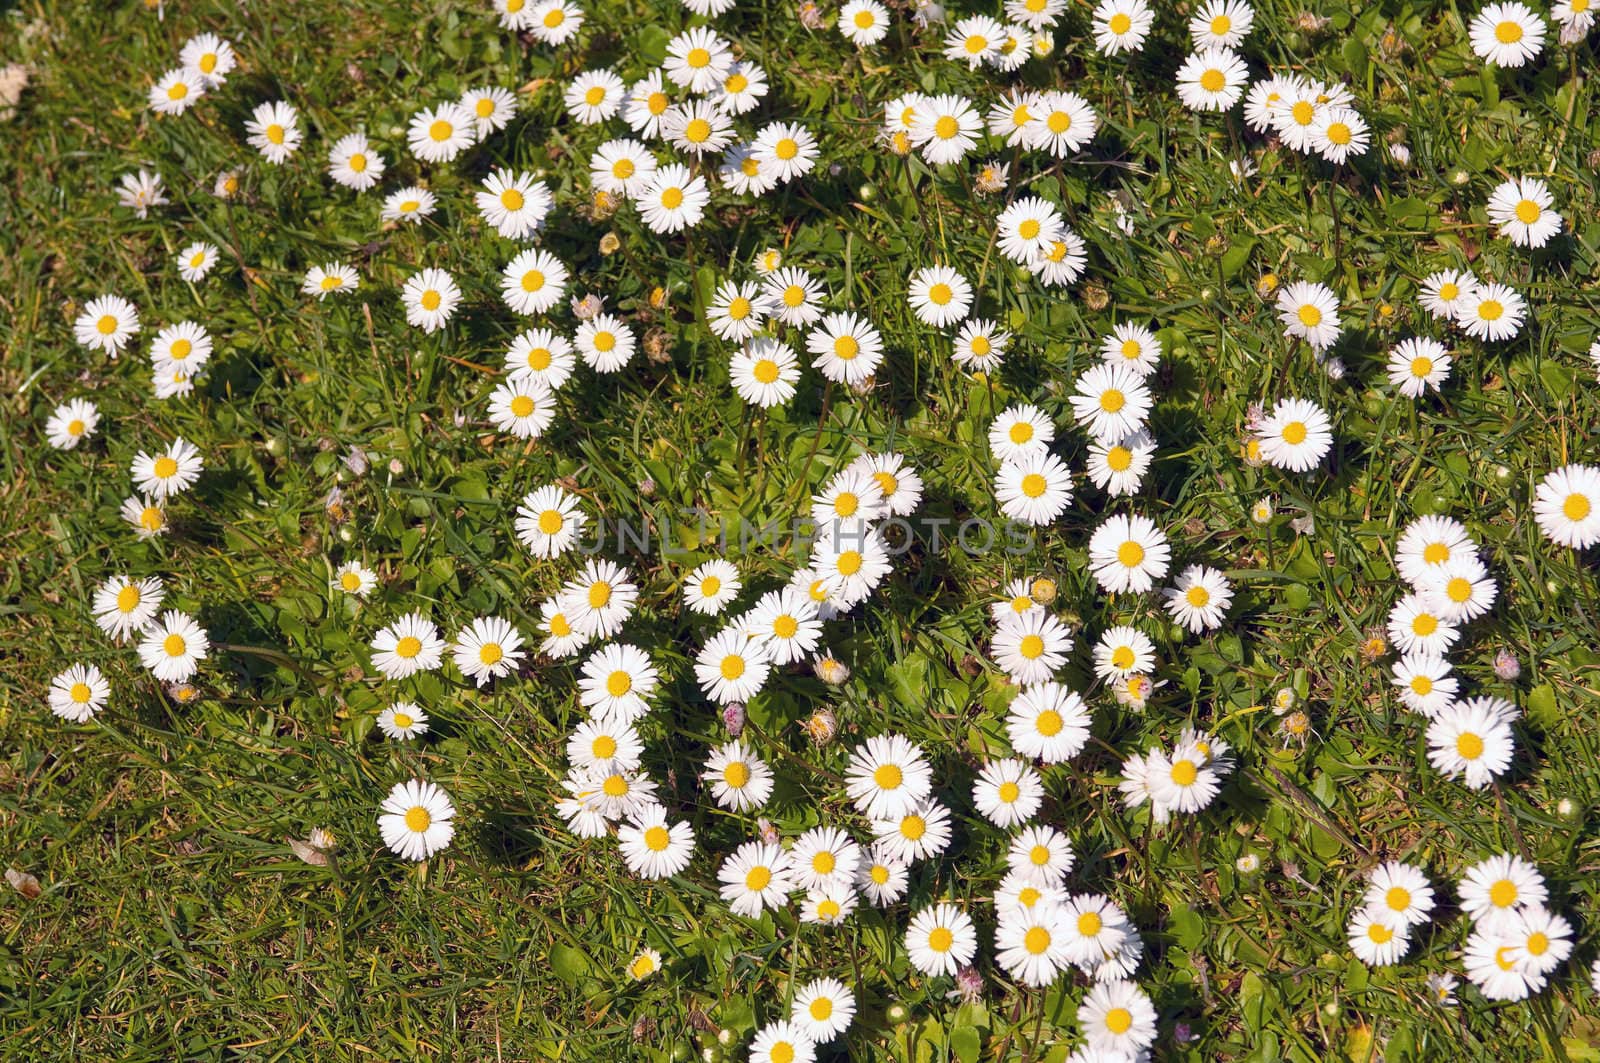 Blooming daisies in a meadow